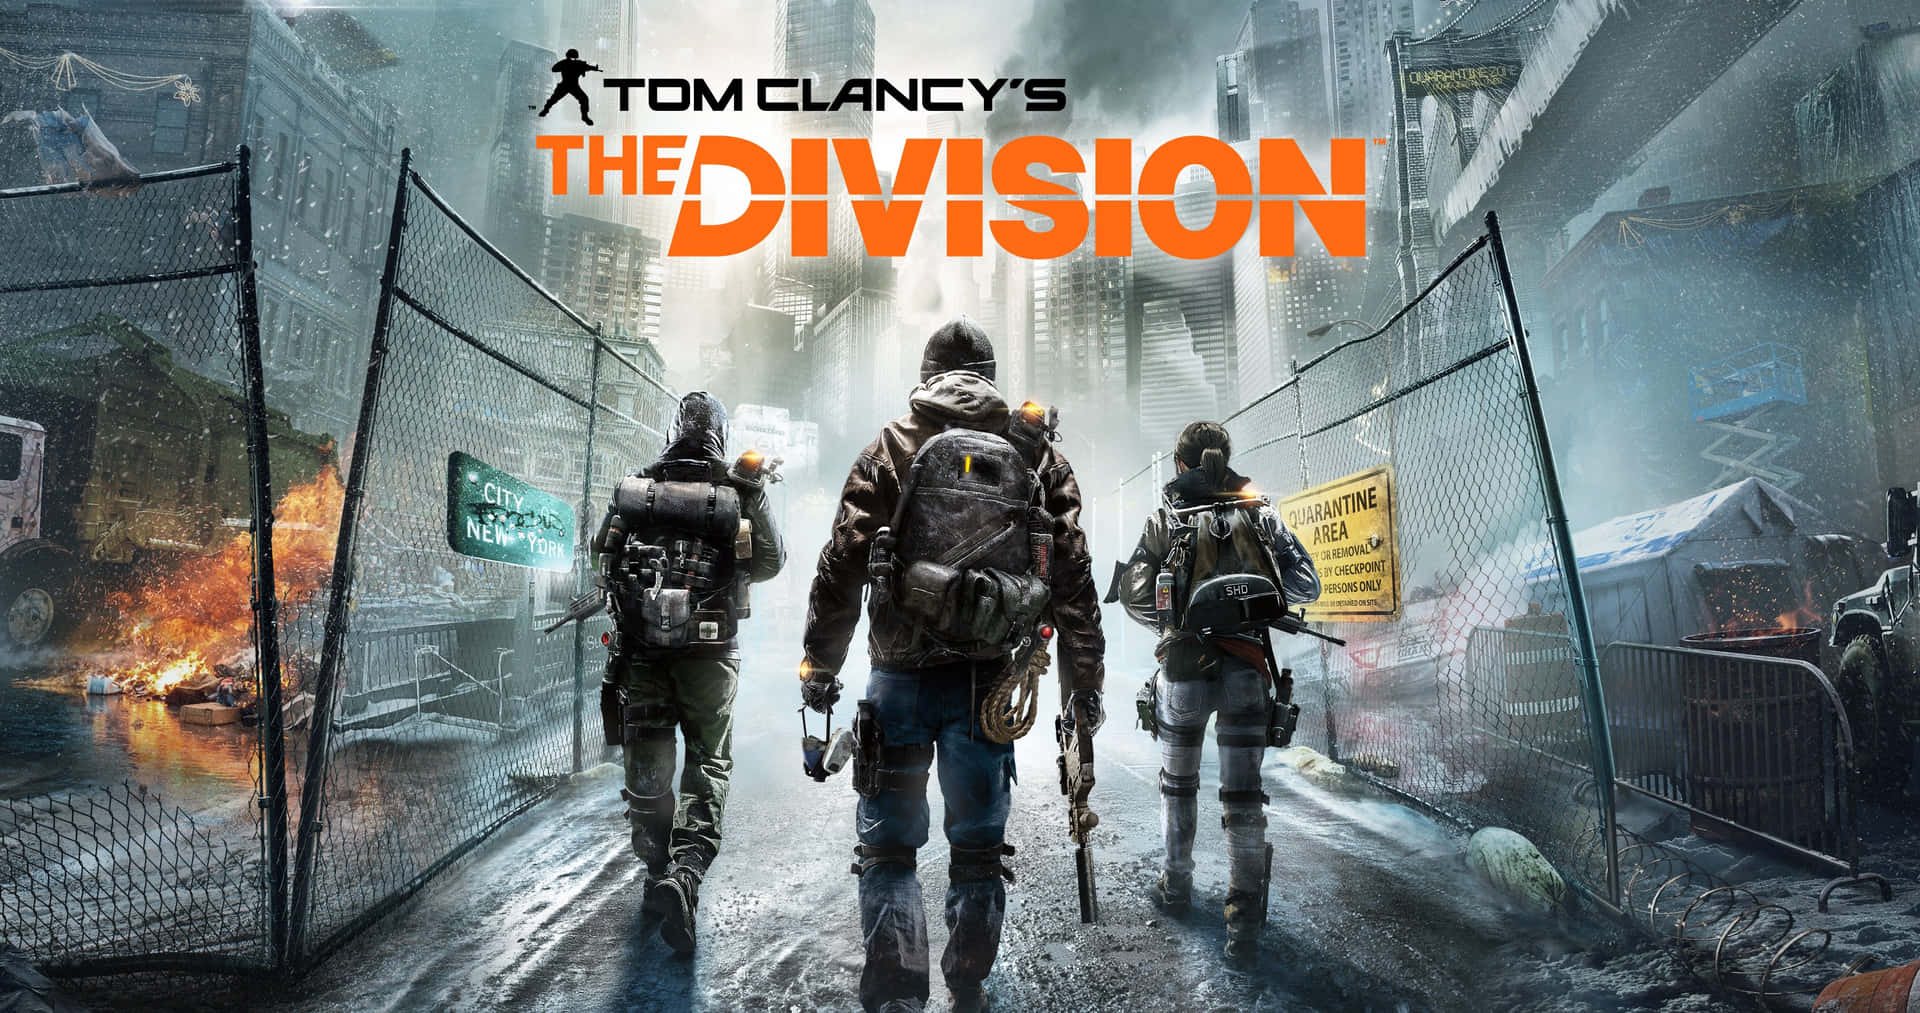 Tom Clancys The Division 4K Tactical Shooter Game Wallpaper